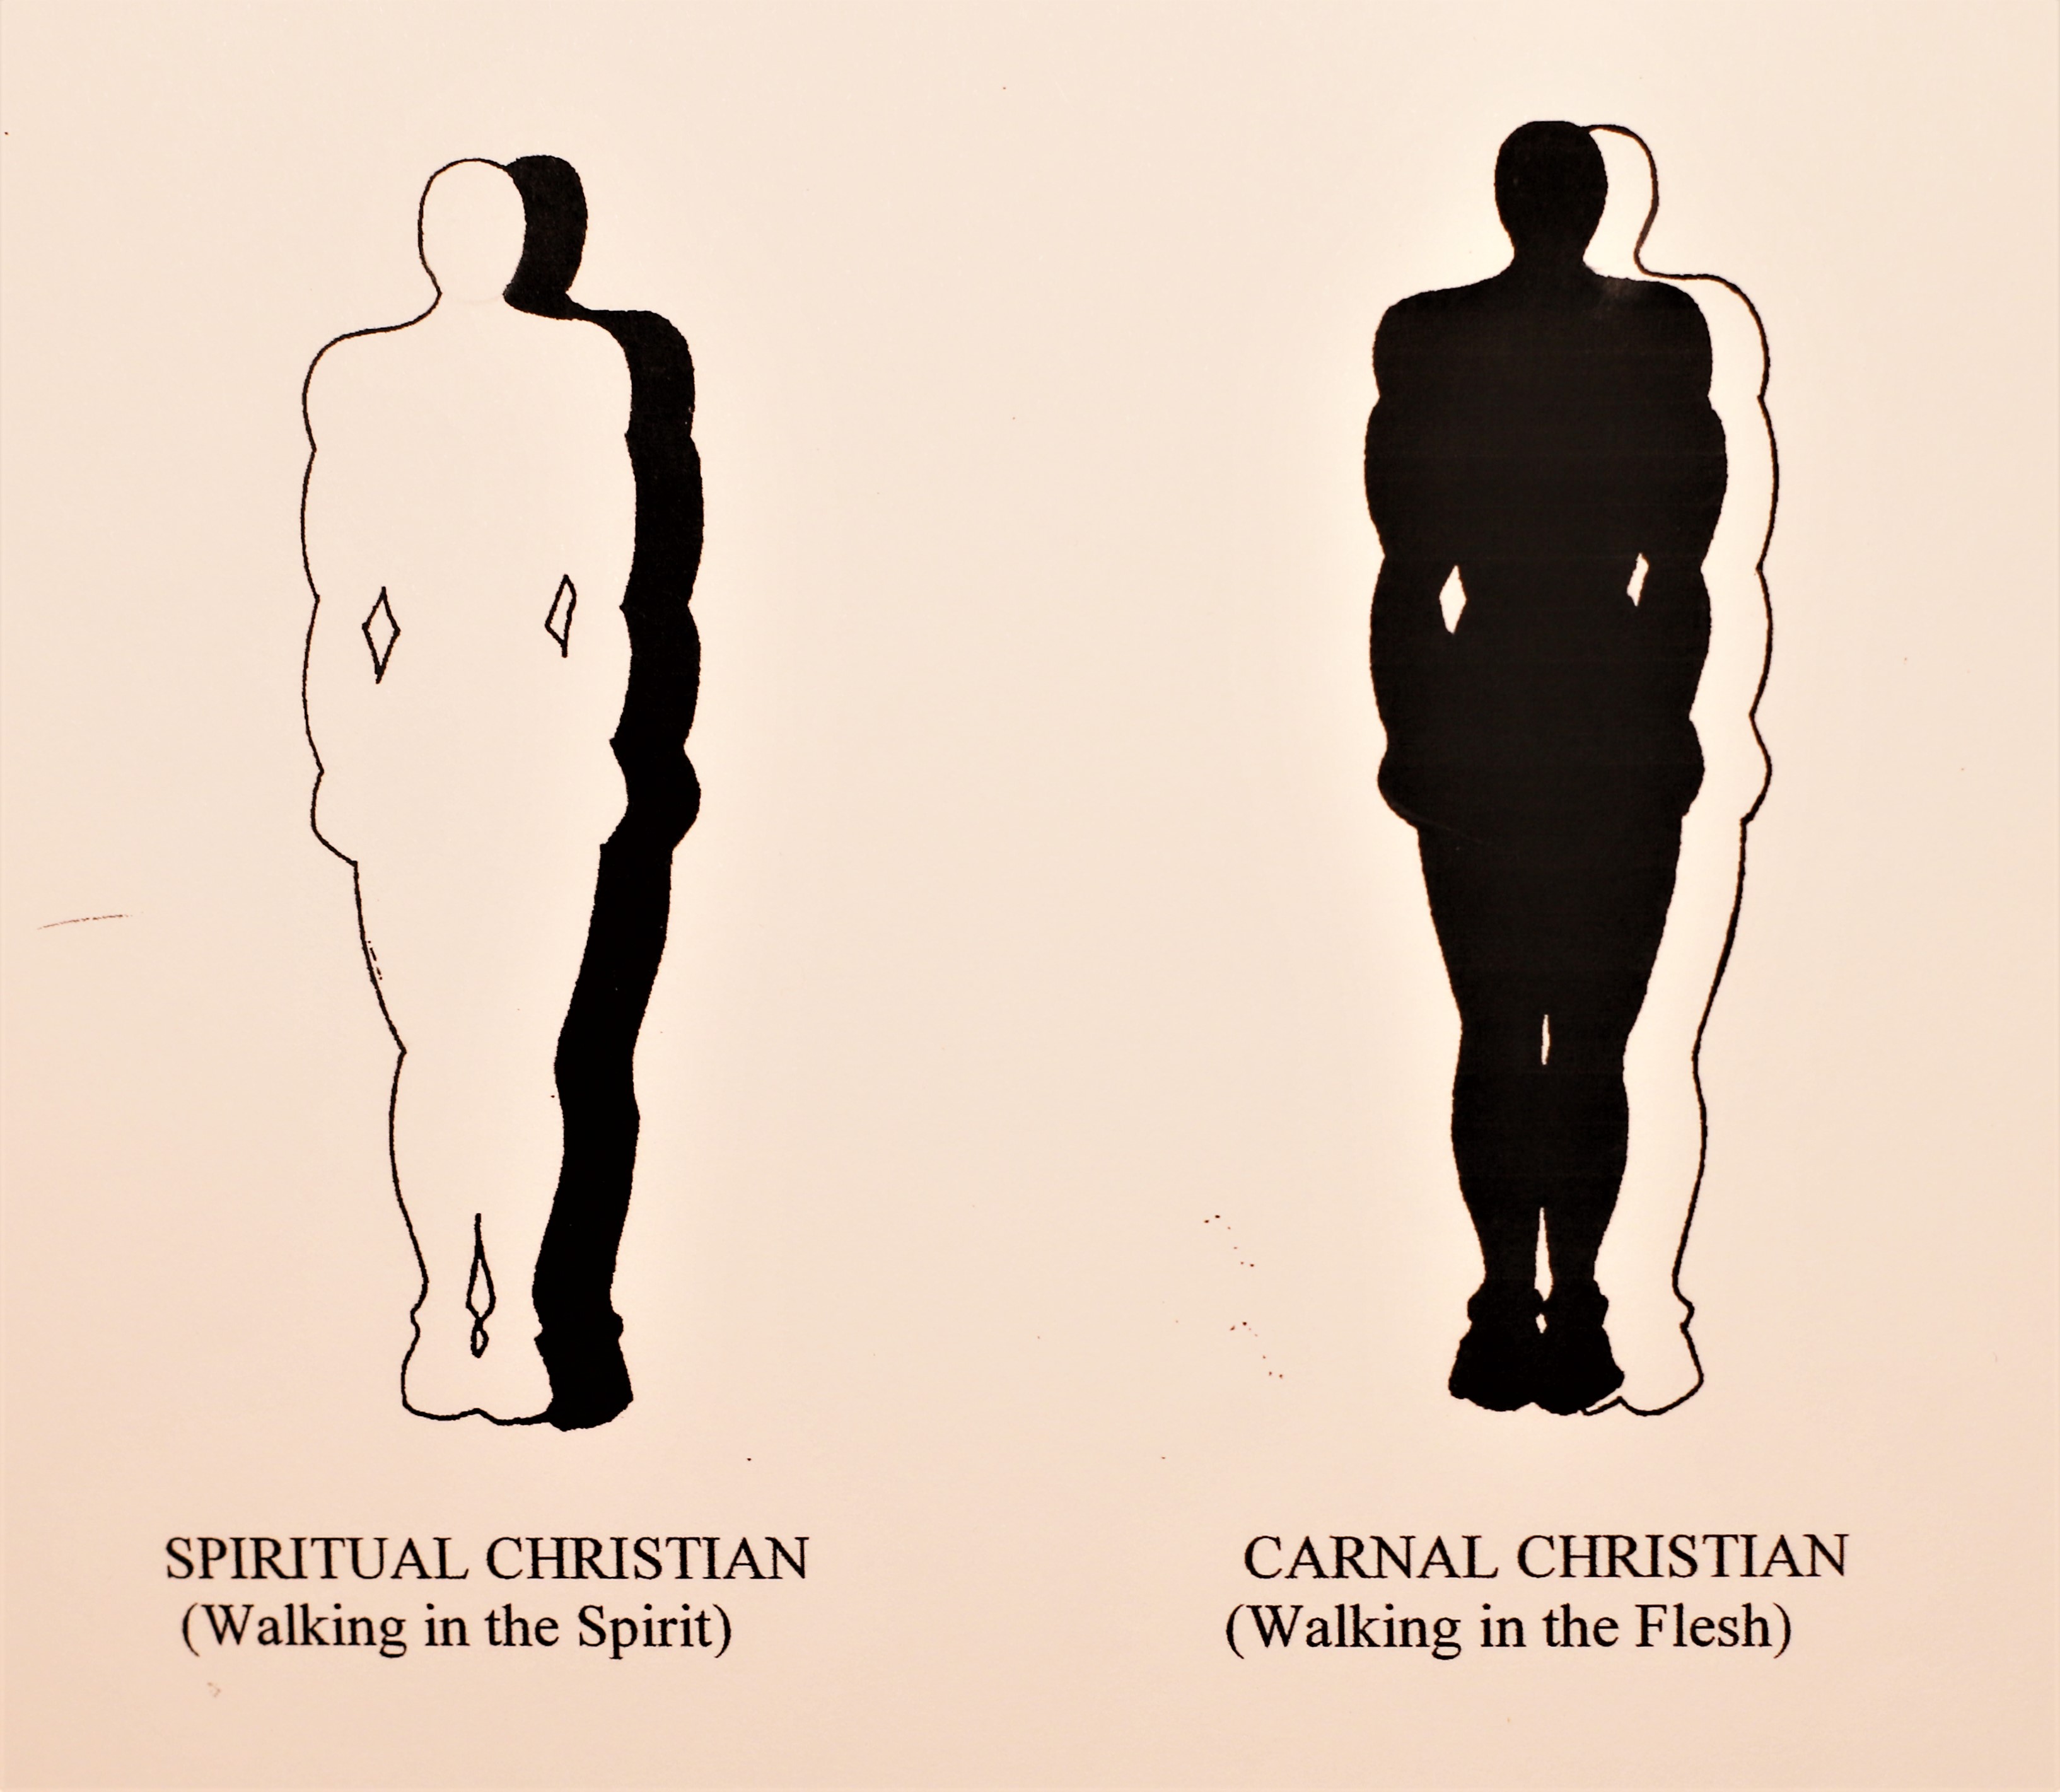 Illustration comparing a "Spiritual Christian," depicted as a white figure with a black shadow walking in the Spirit, to a "Carnal Christian," shown as a black figure with a white shadow walking in the Flesh. Labels are beneath each figure, highlighting the contrast between living as a New Creature in Christ and worldly ways.